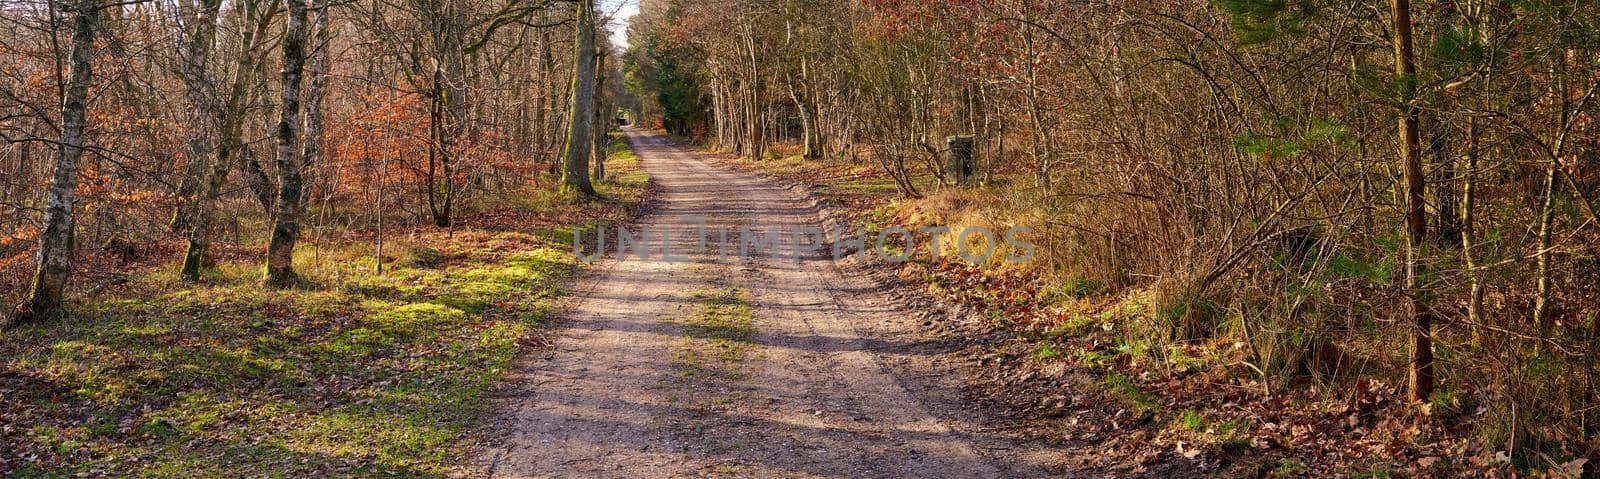 Dirt road in autumn forest. Wide angle of vibrant green grass and orange leaves growing on trees in a rural landscape in fall. Endless country path leading in peaceful and quiet nature background by YuriArcurs